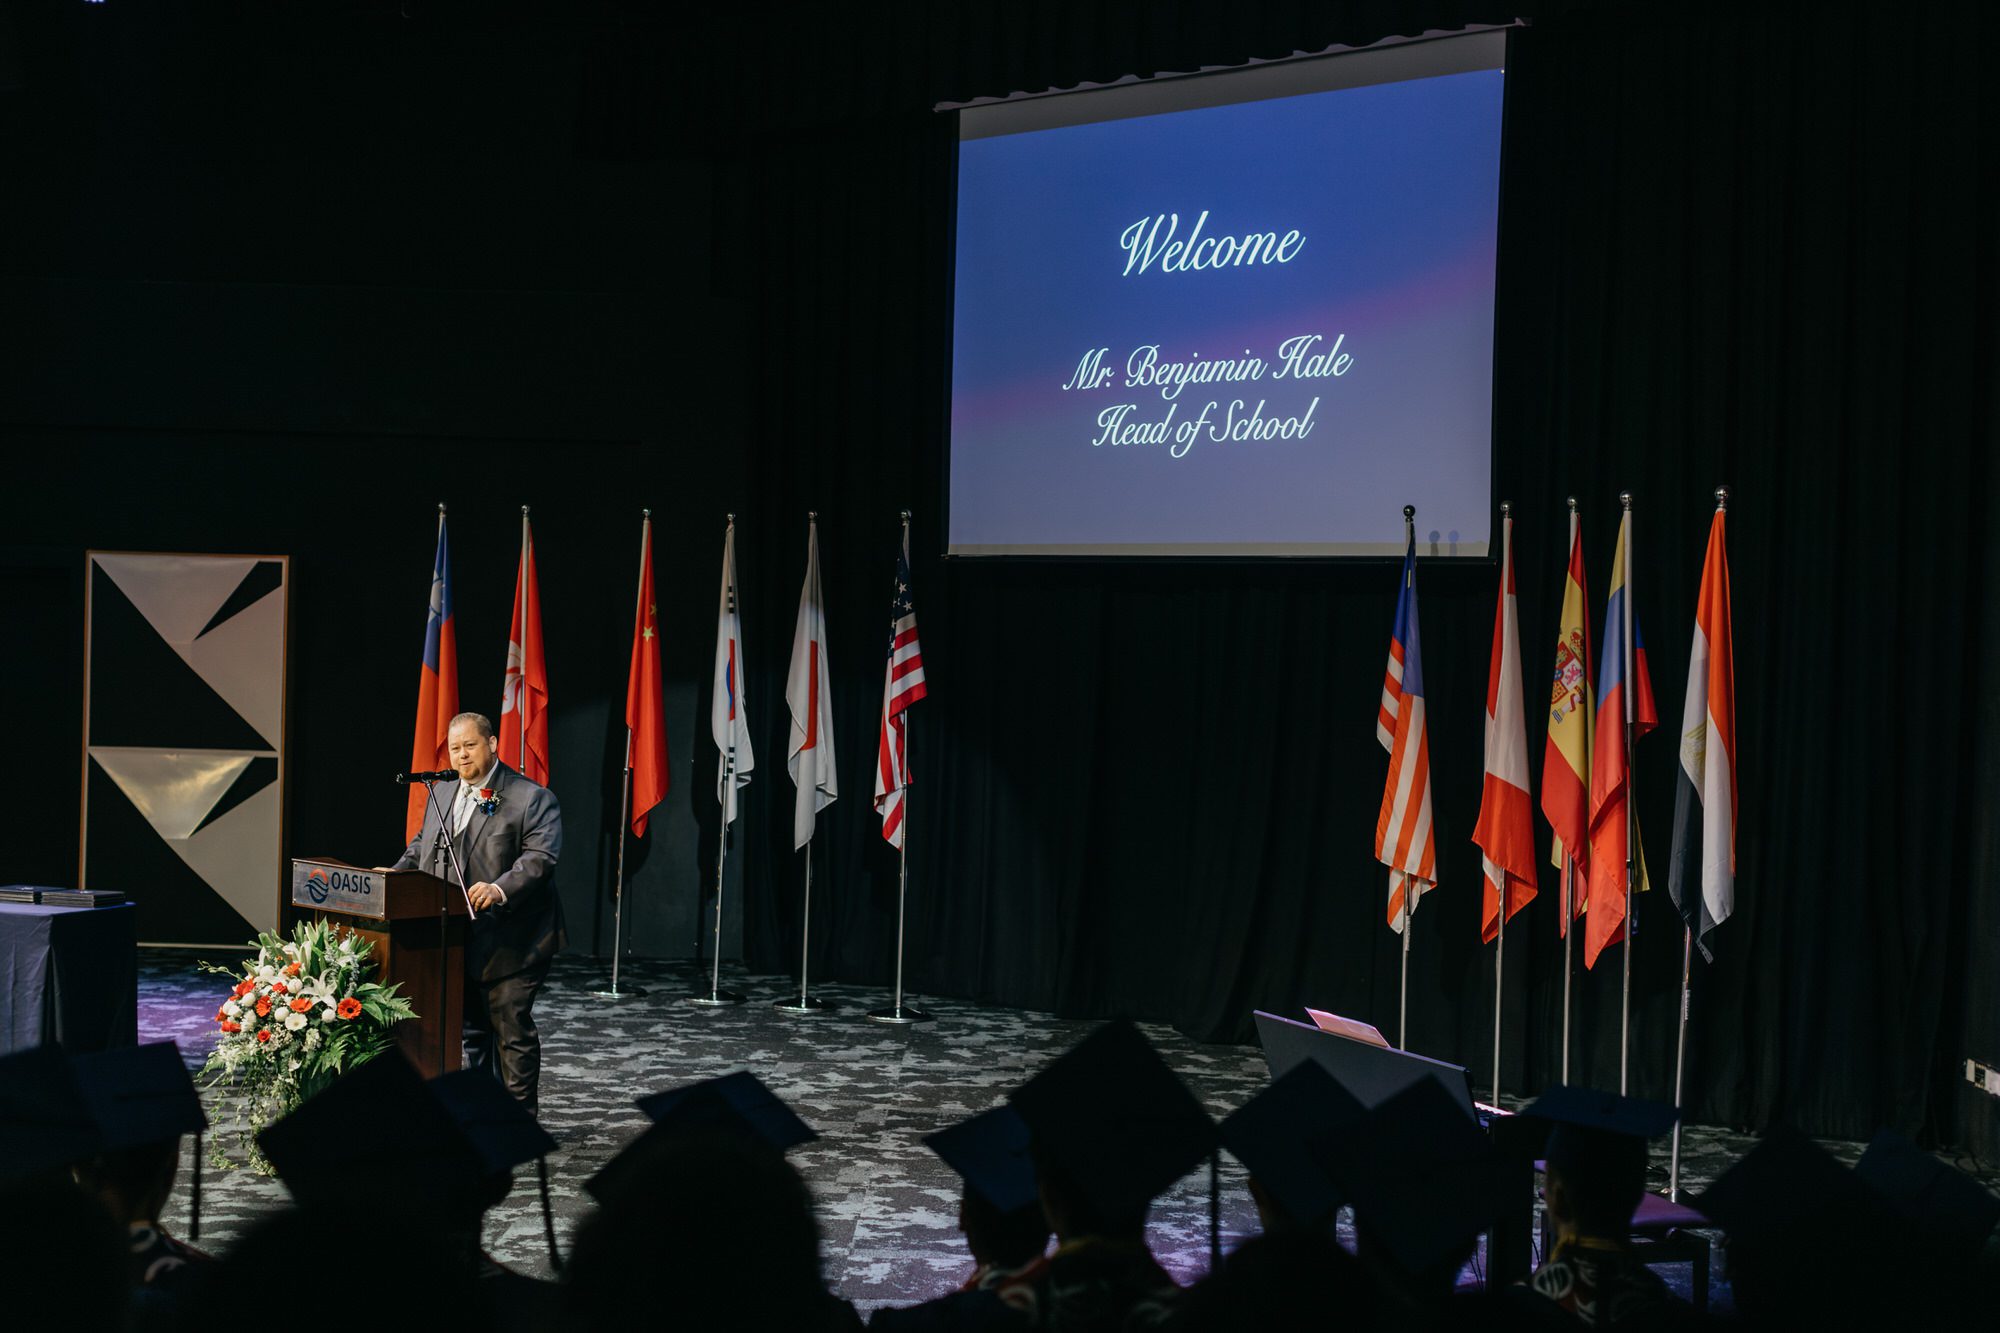 A beautifully decorated venue with a small audience, creating an intimate atmosphere for the Oasis International School 2023 graduation ceremony.